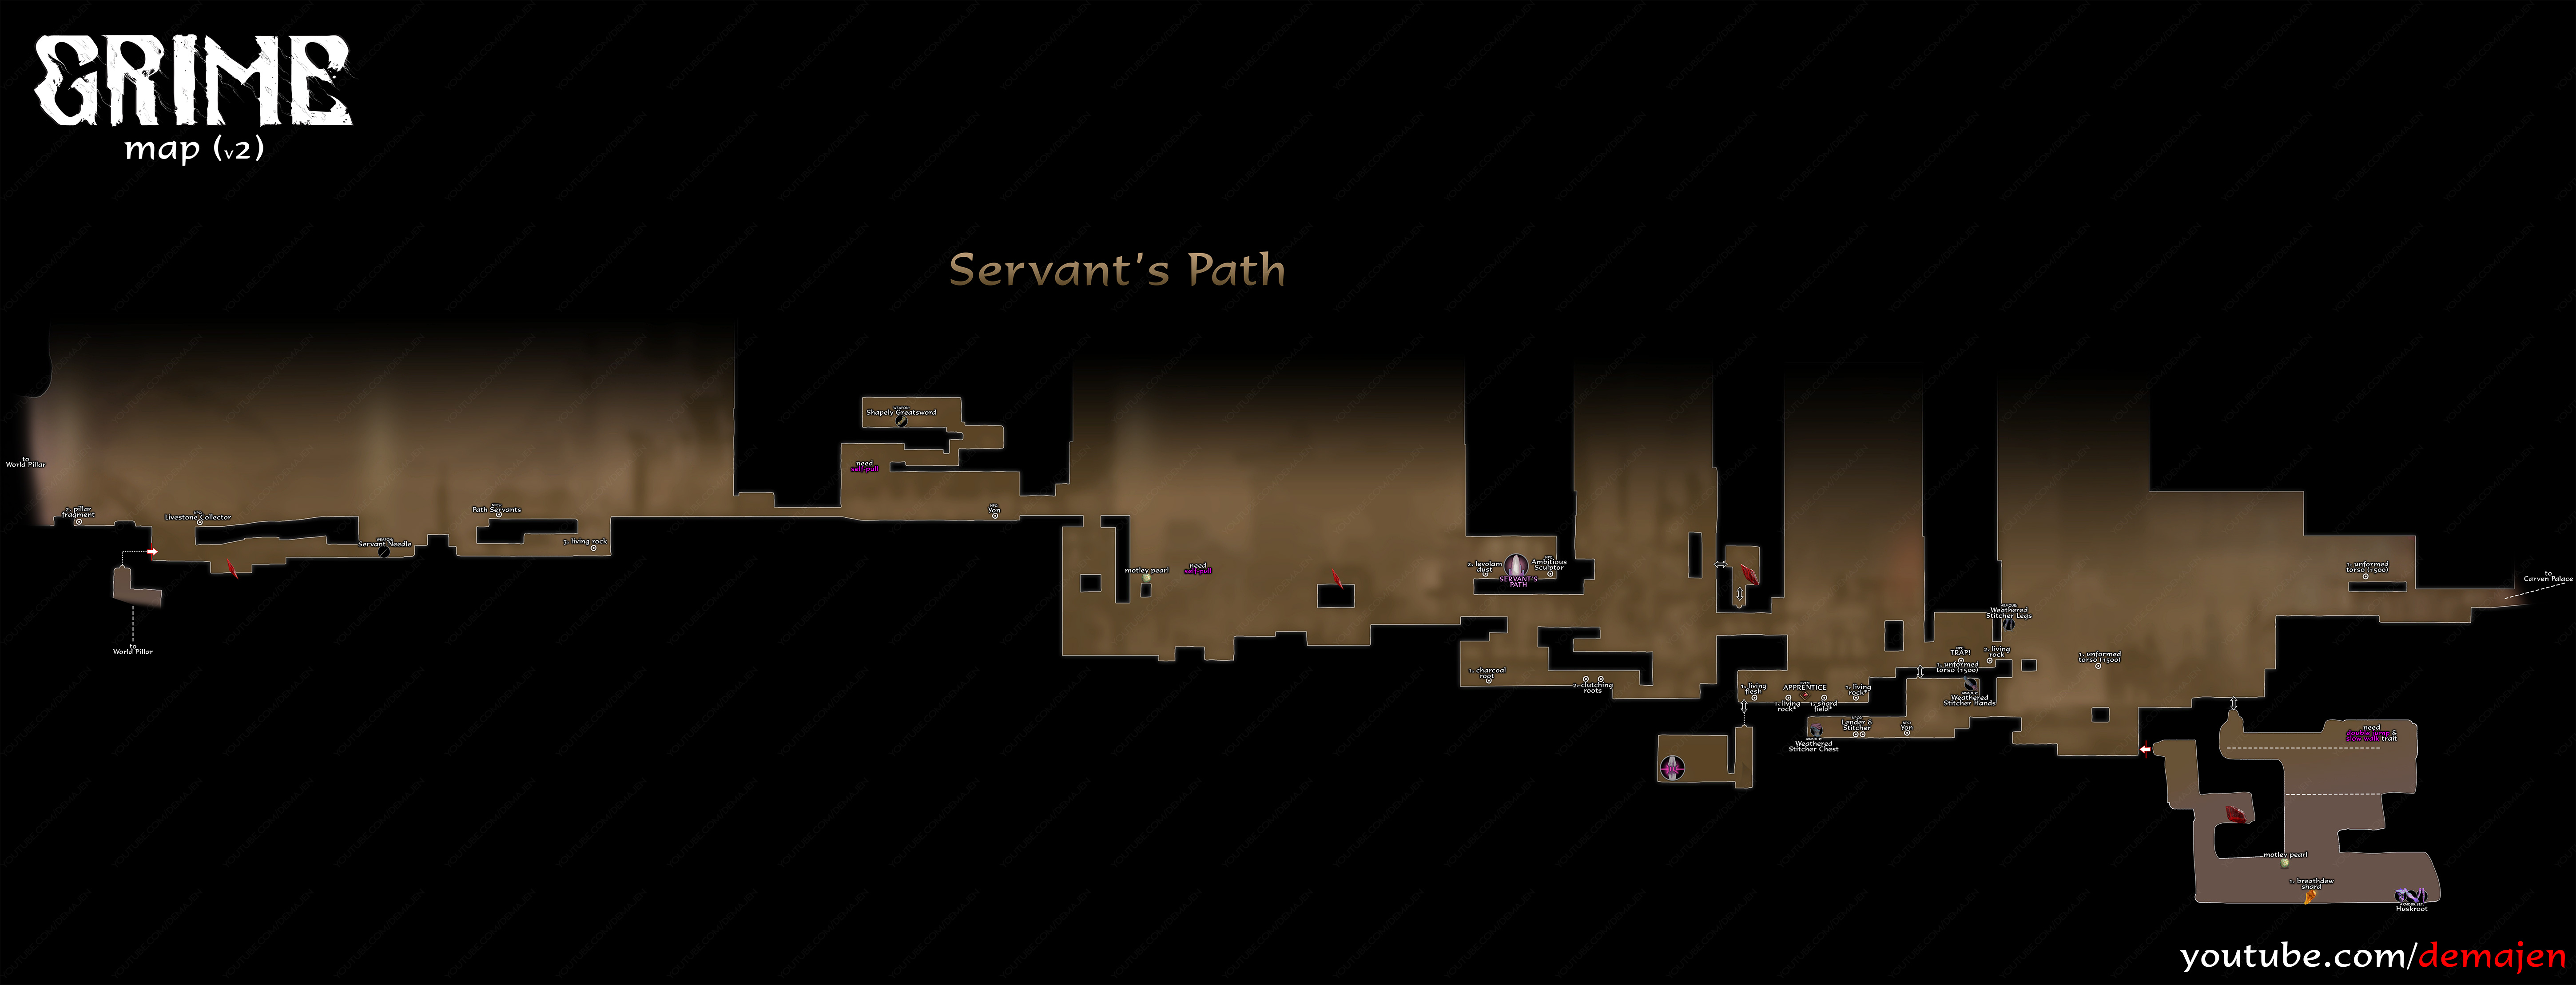 GRIME All Maps in Game + Gameplay Tips and Information - Servant's Path - 3EC96B7